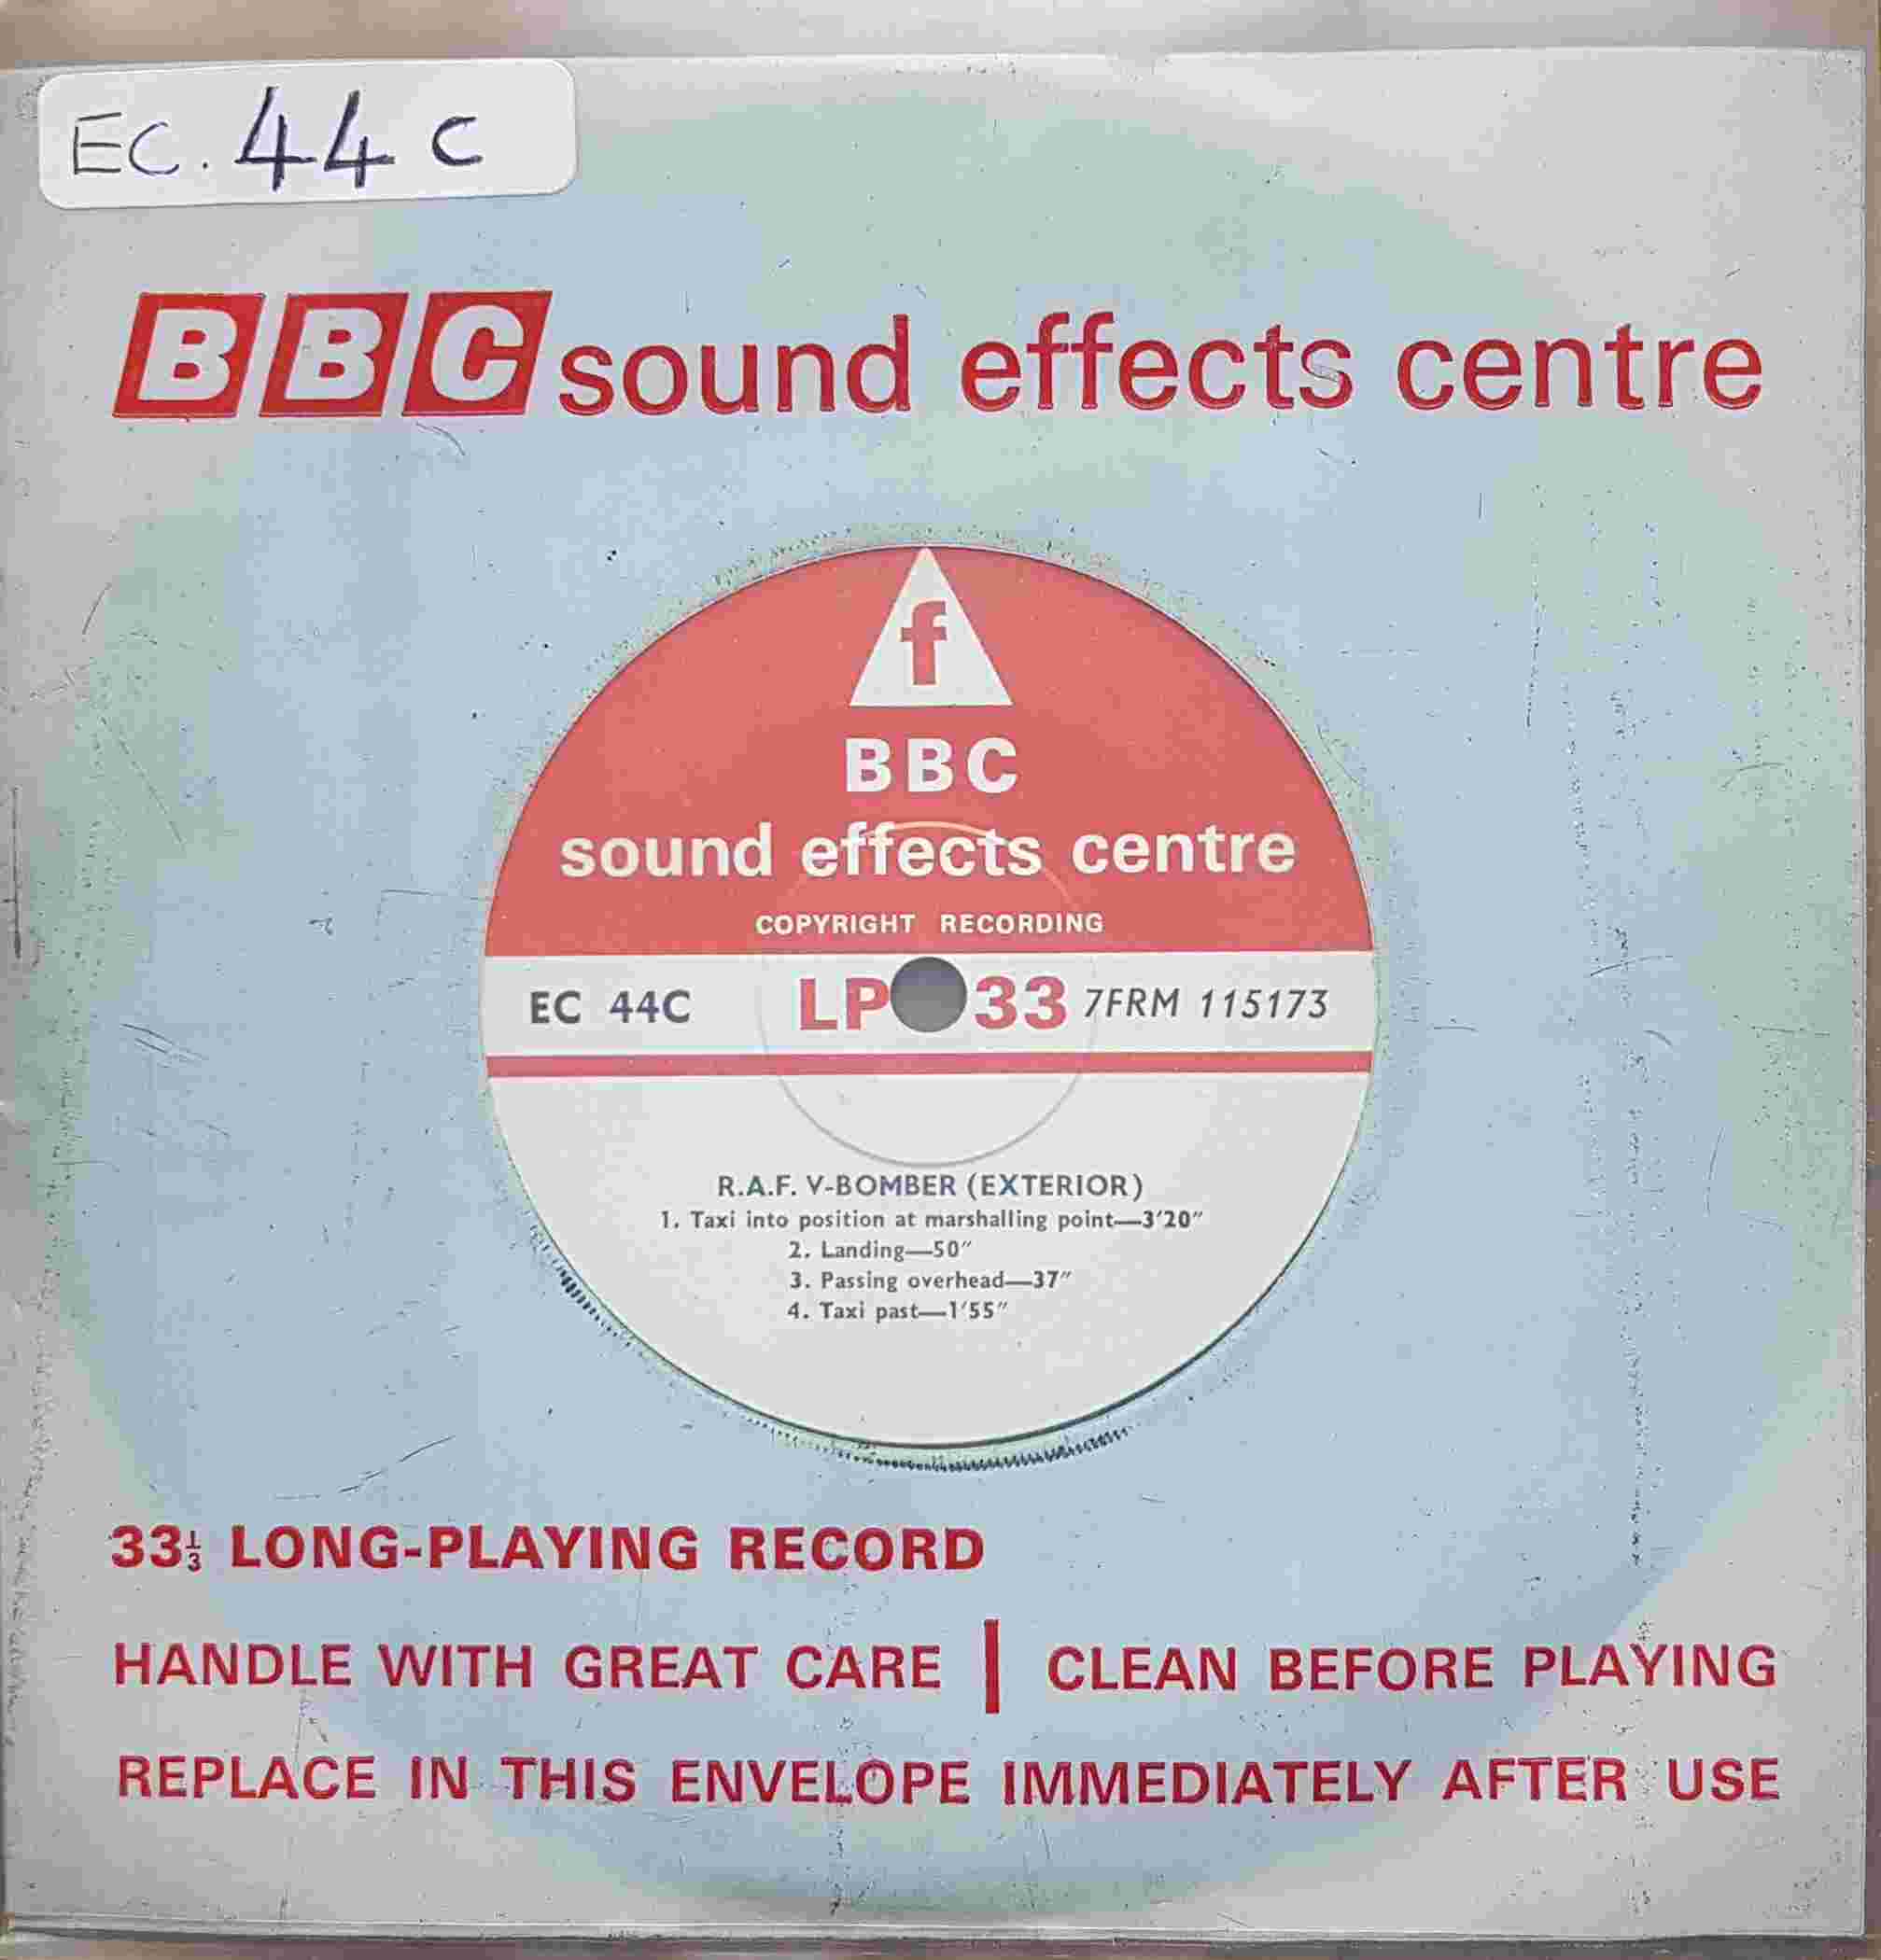 Picture of EC 44C R.A.F. V-Bomber (Exterior) / Atmosphere at an R. A. F. station by artist Not registered from the BBC singles - Records and Tapes library